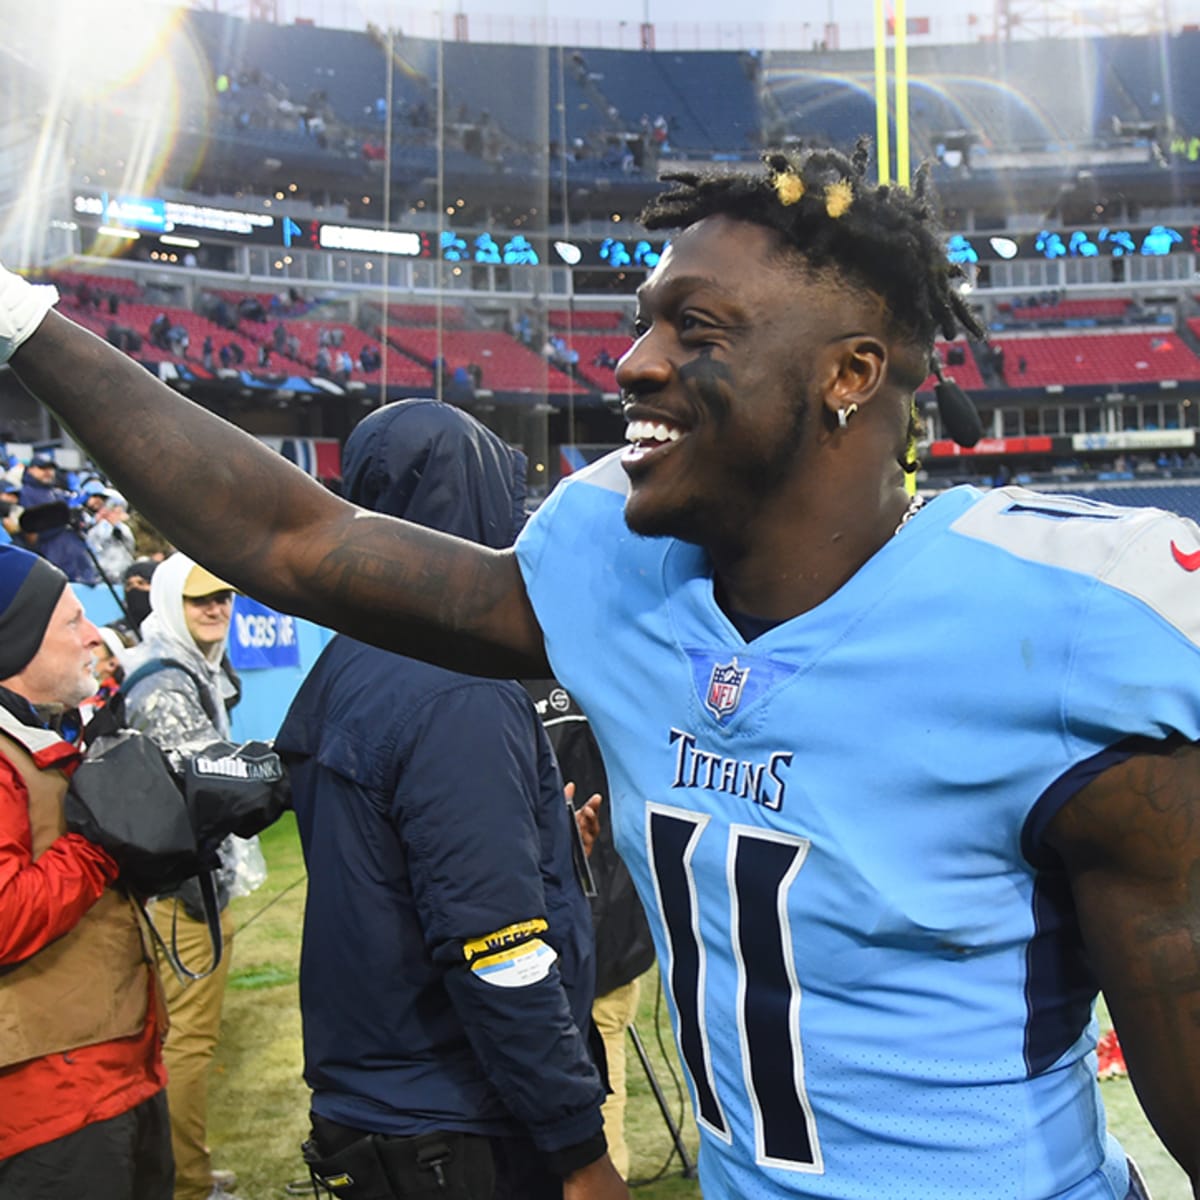 NFL Draft results 2022: Titans select Treylon Burks with No. 18 pick after  trading AJ Brown to Eagles - DraftKings Network